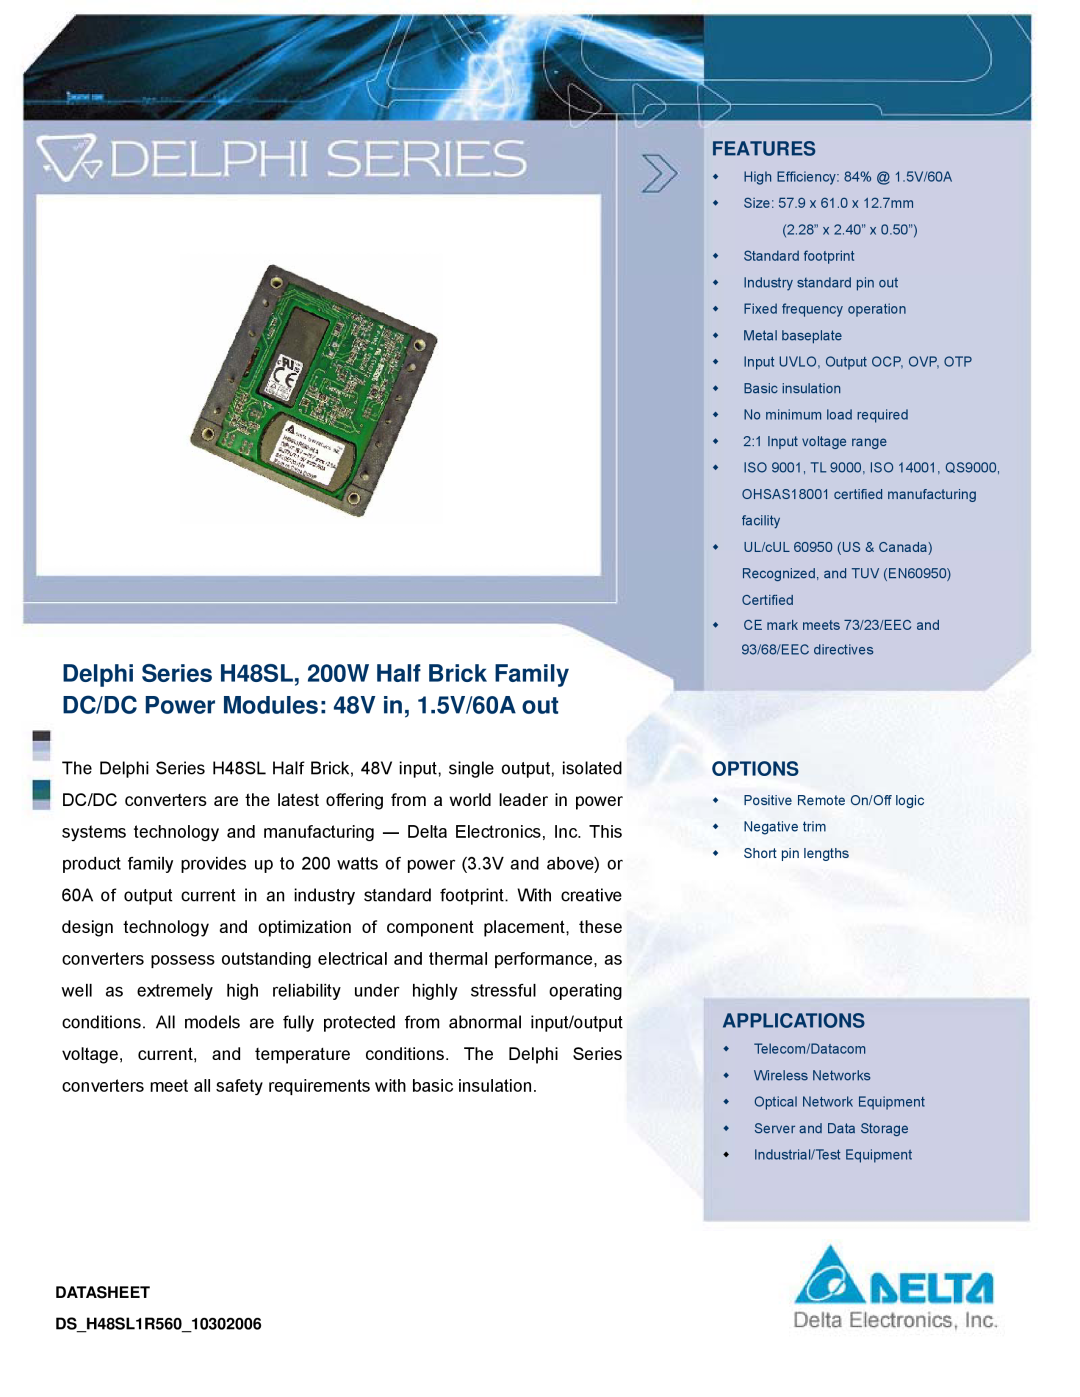 Delta Electronics manual Features, Options, Applications, DATASHEET DSH48SL1R56010302006 